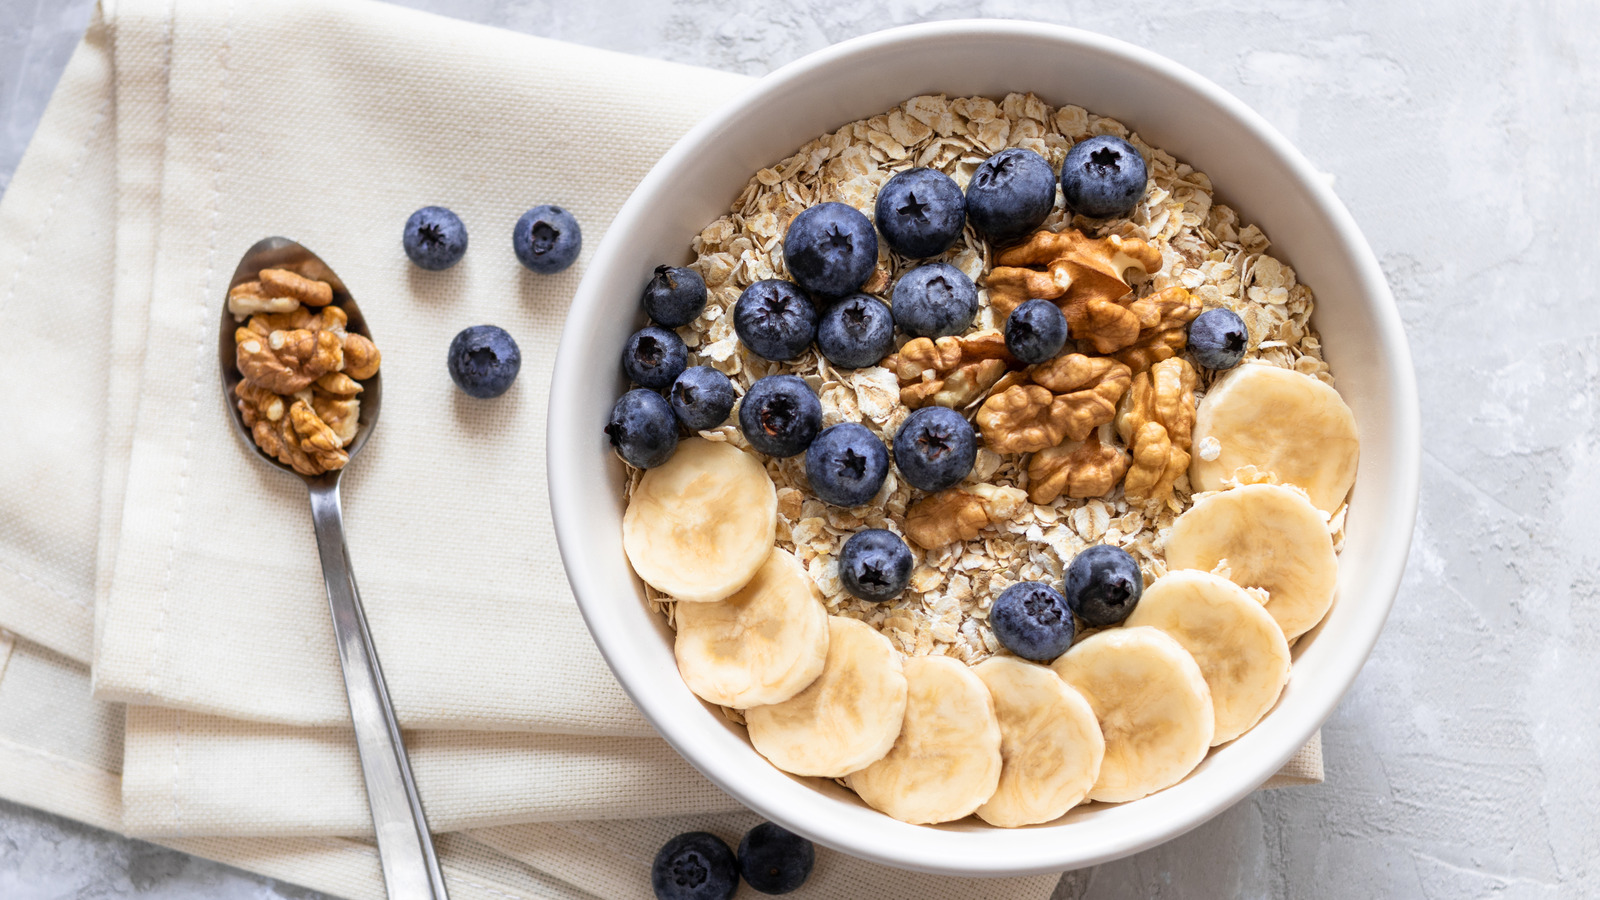 https://www.tastingtable.com/img/gallery/why-you-should-always-toast-the-oats-for-your-oatmeal/l-intro-1658995429.jpg